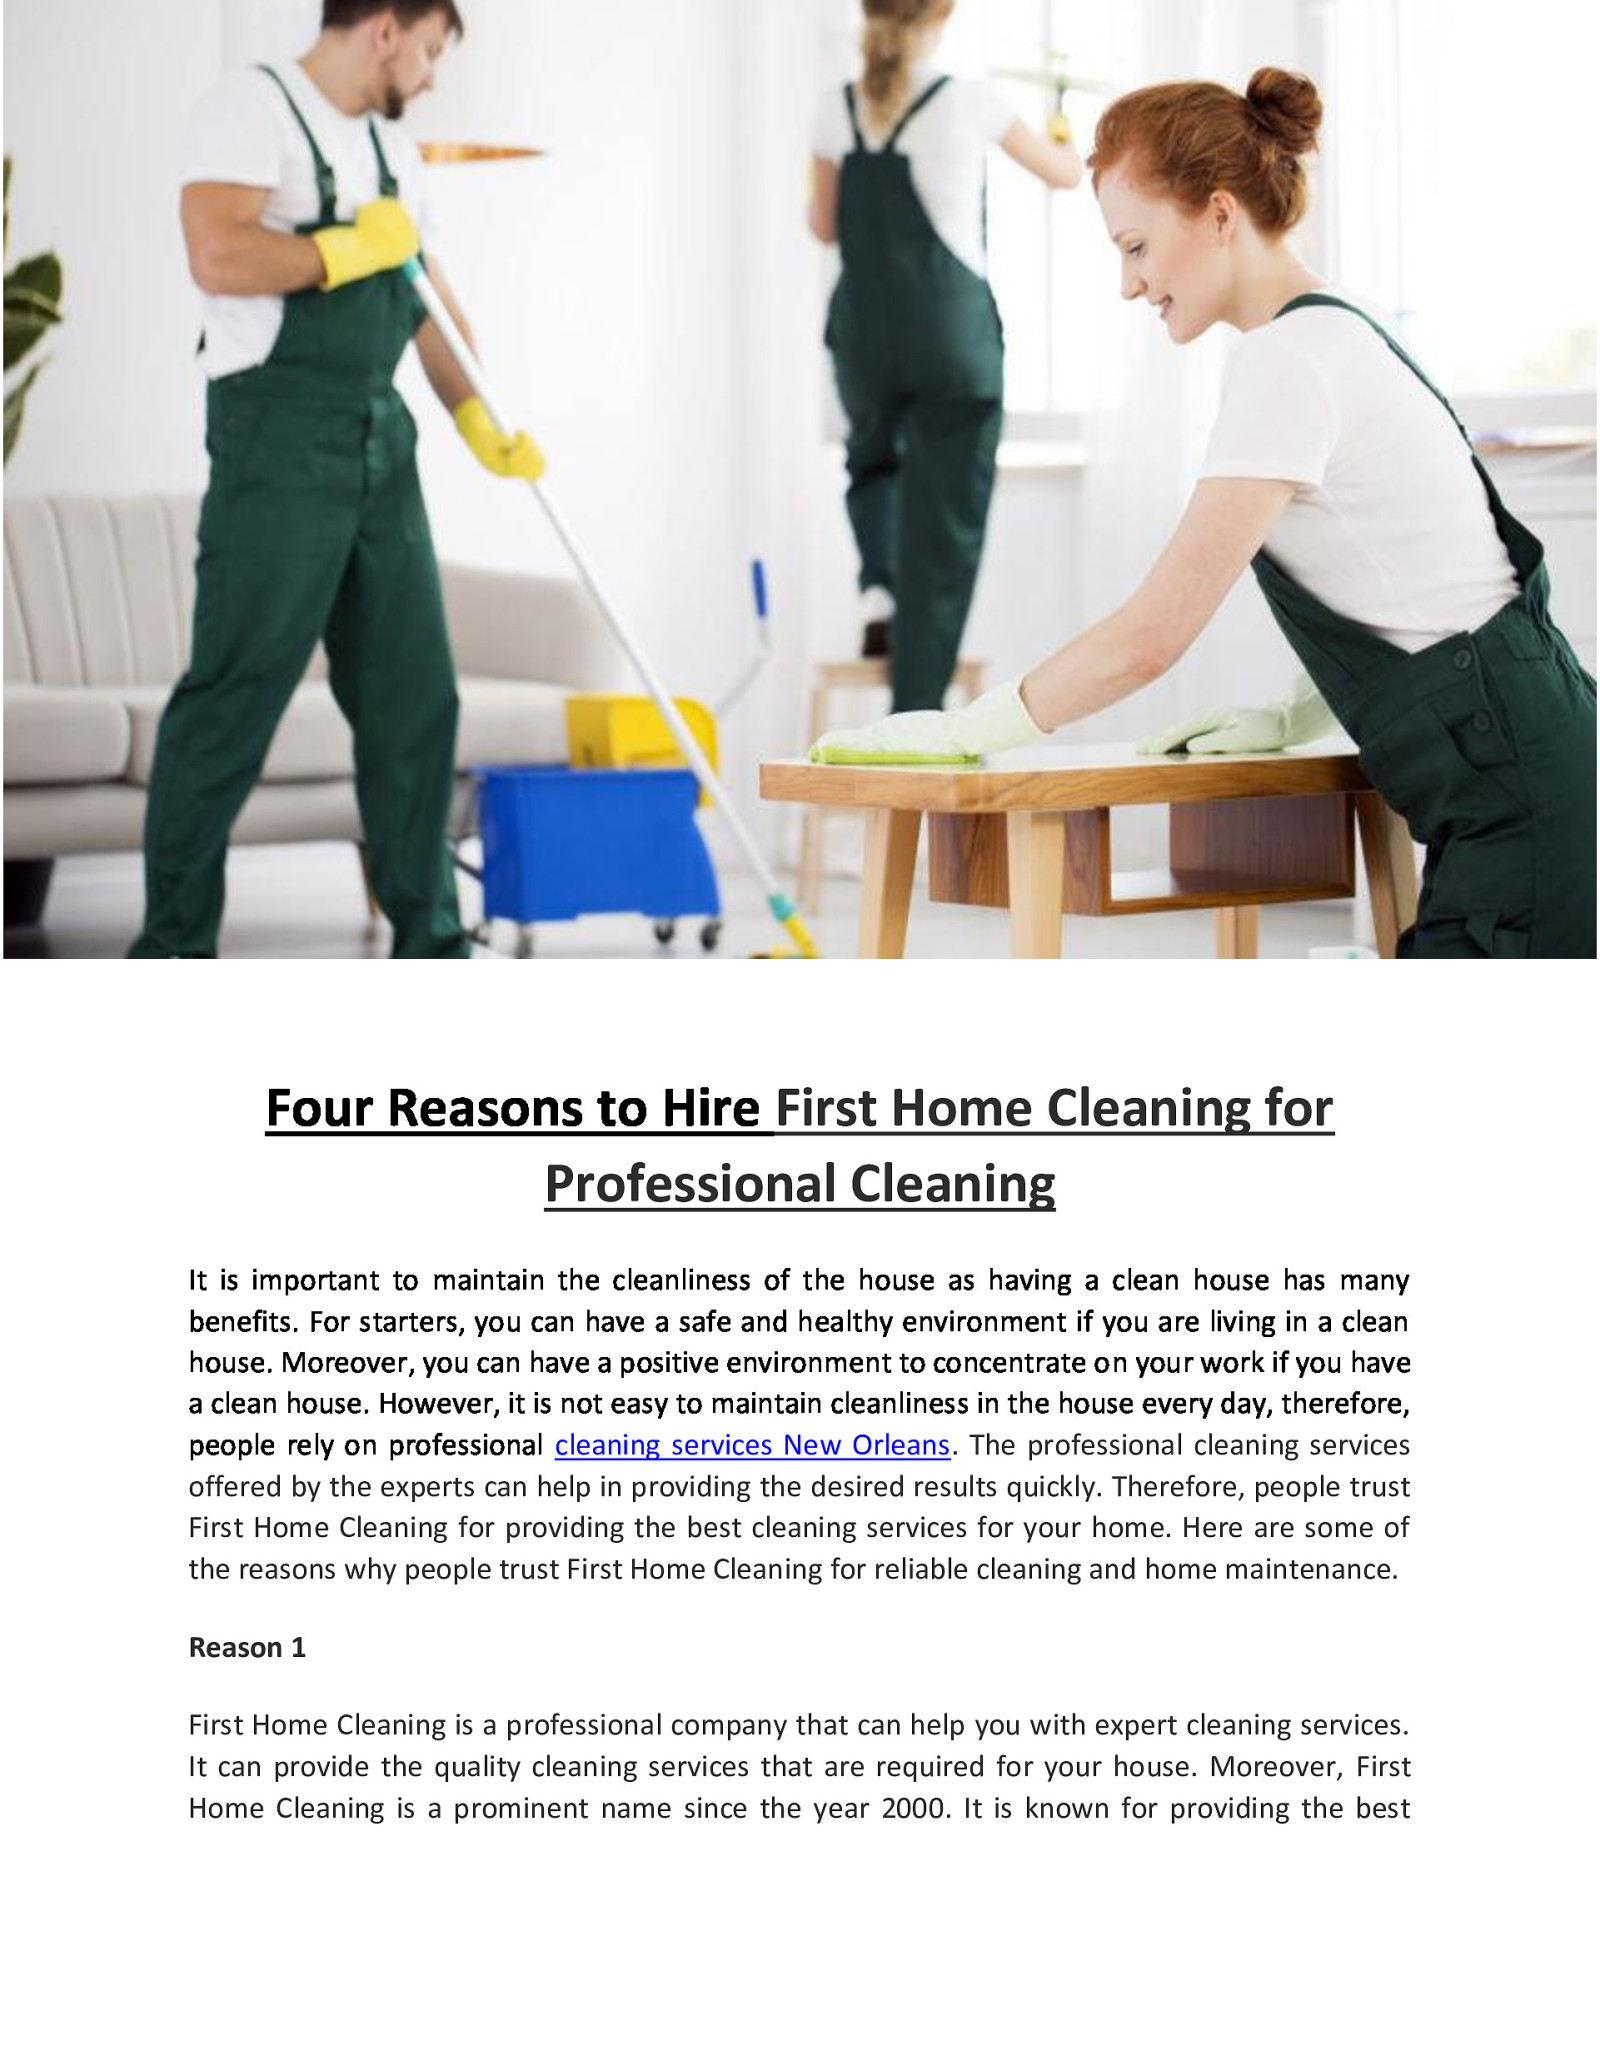 Four Reasons to Hire First Home Cleaning for Professional Cleaning